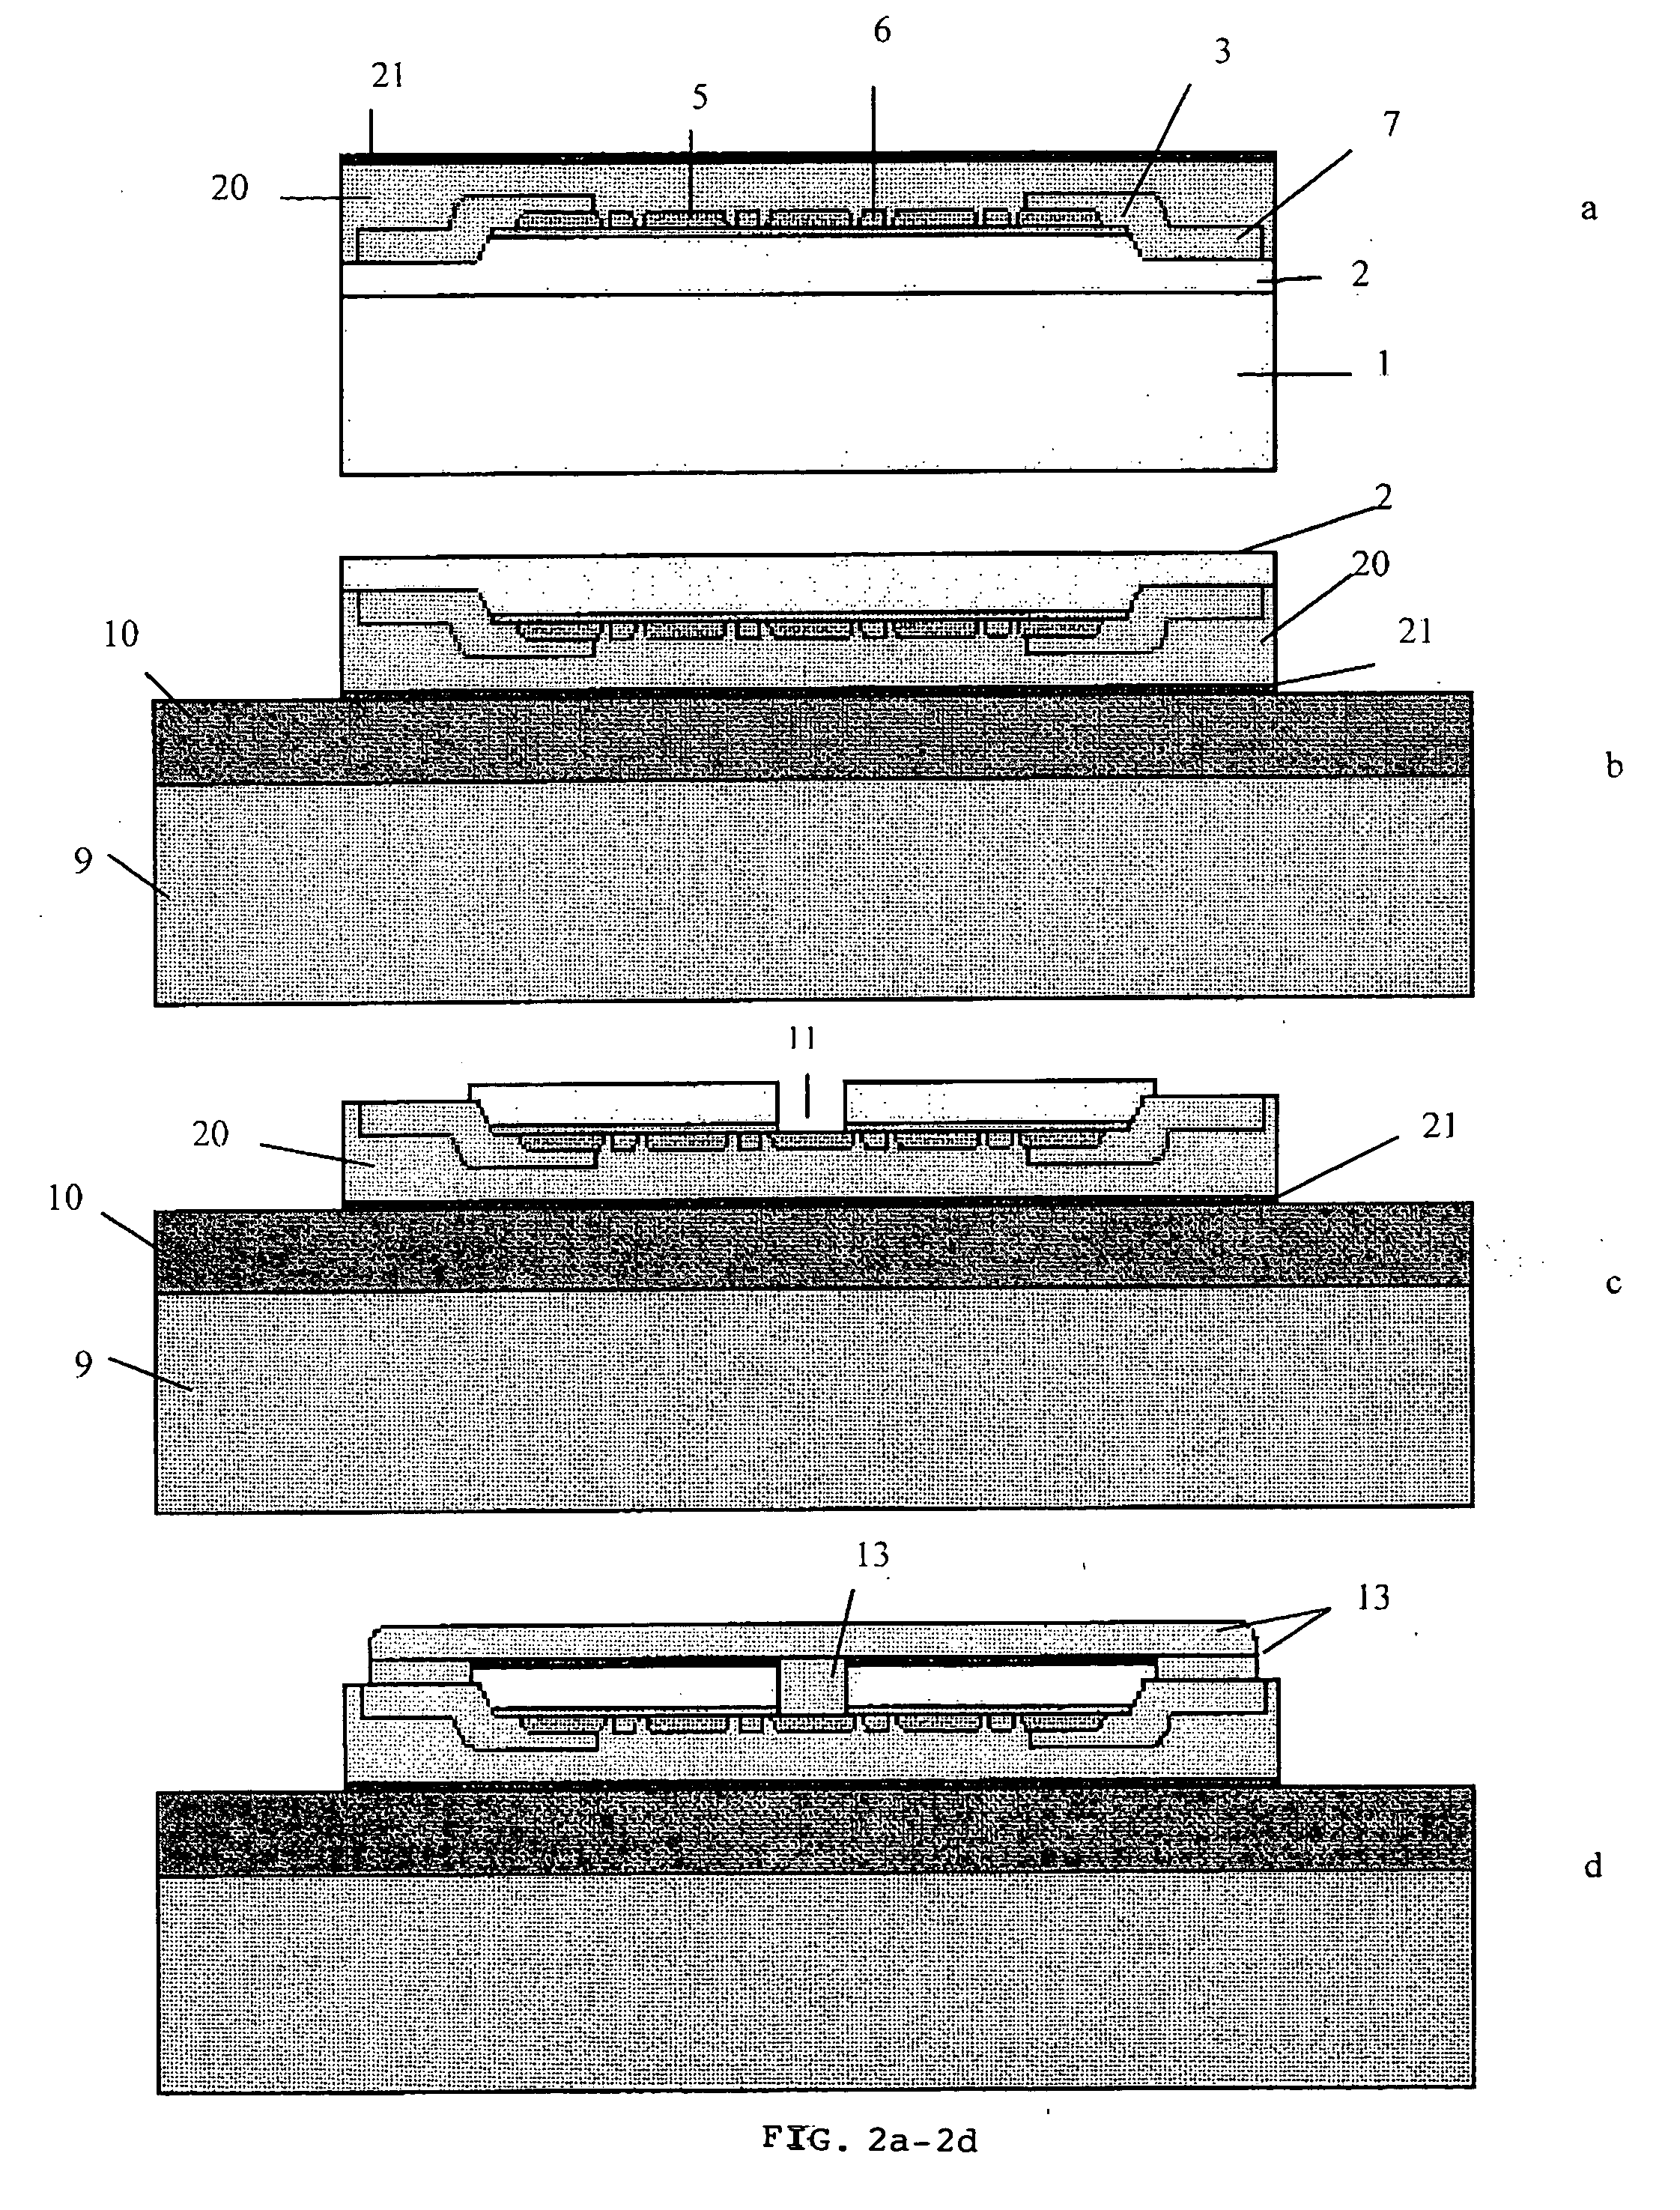 Method for producing a semiconductor device and resulting device